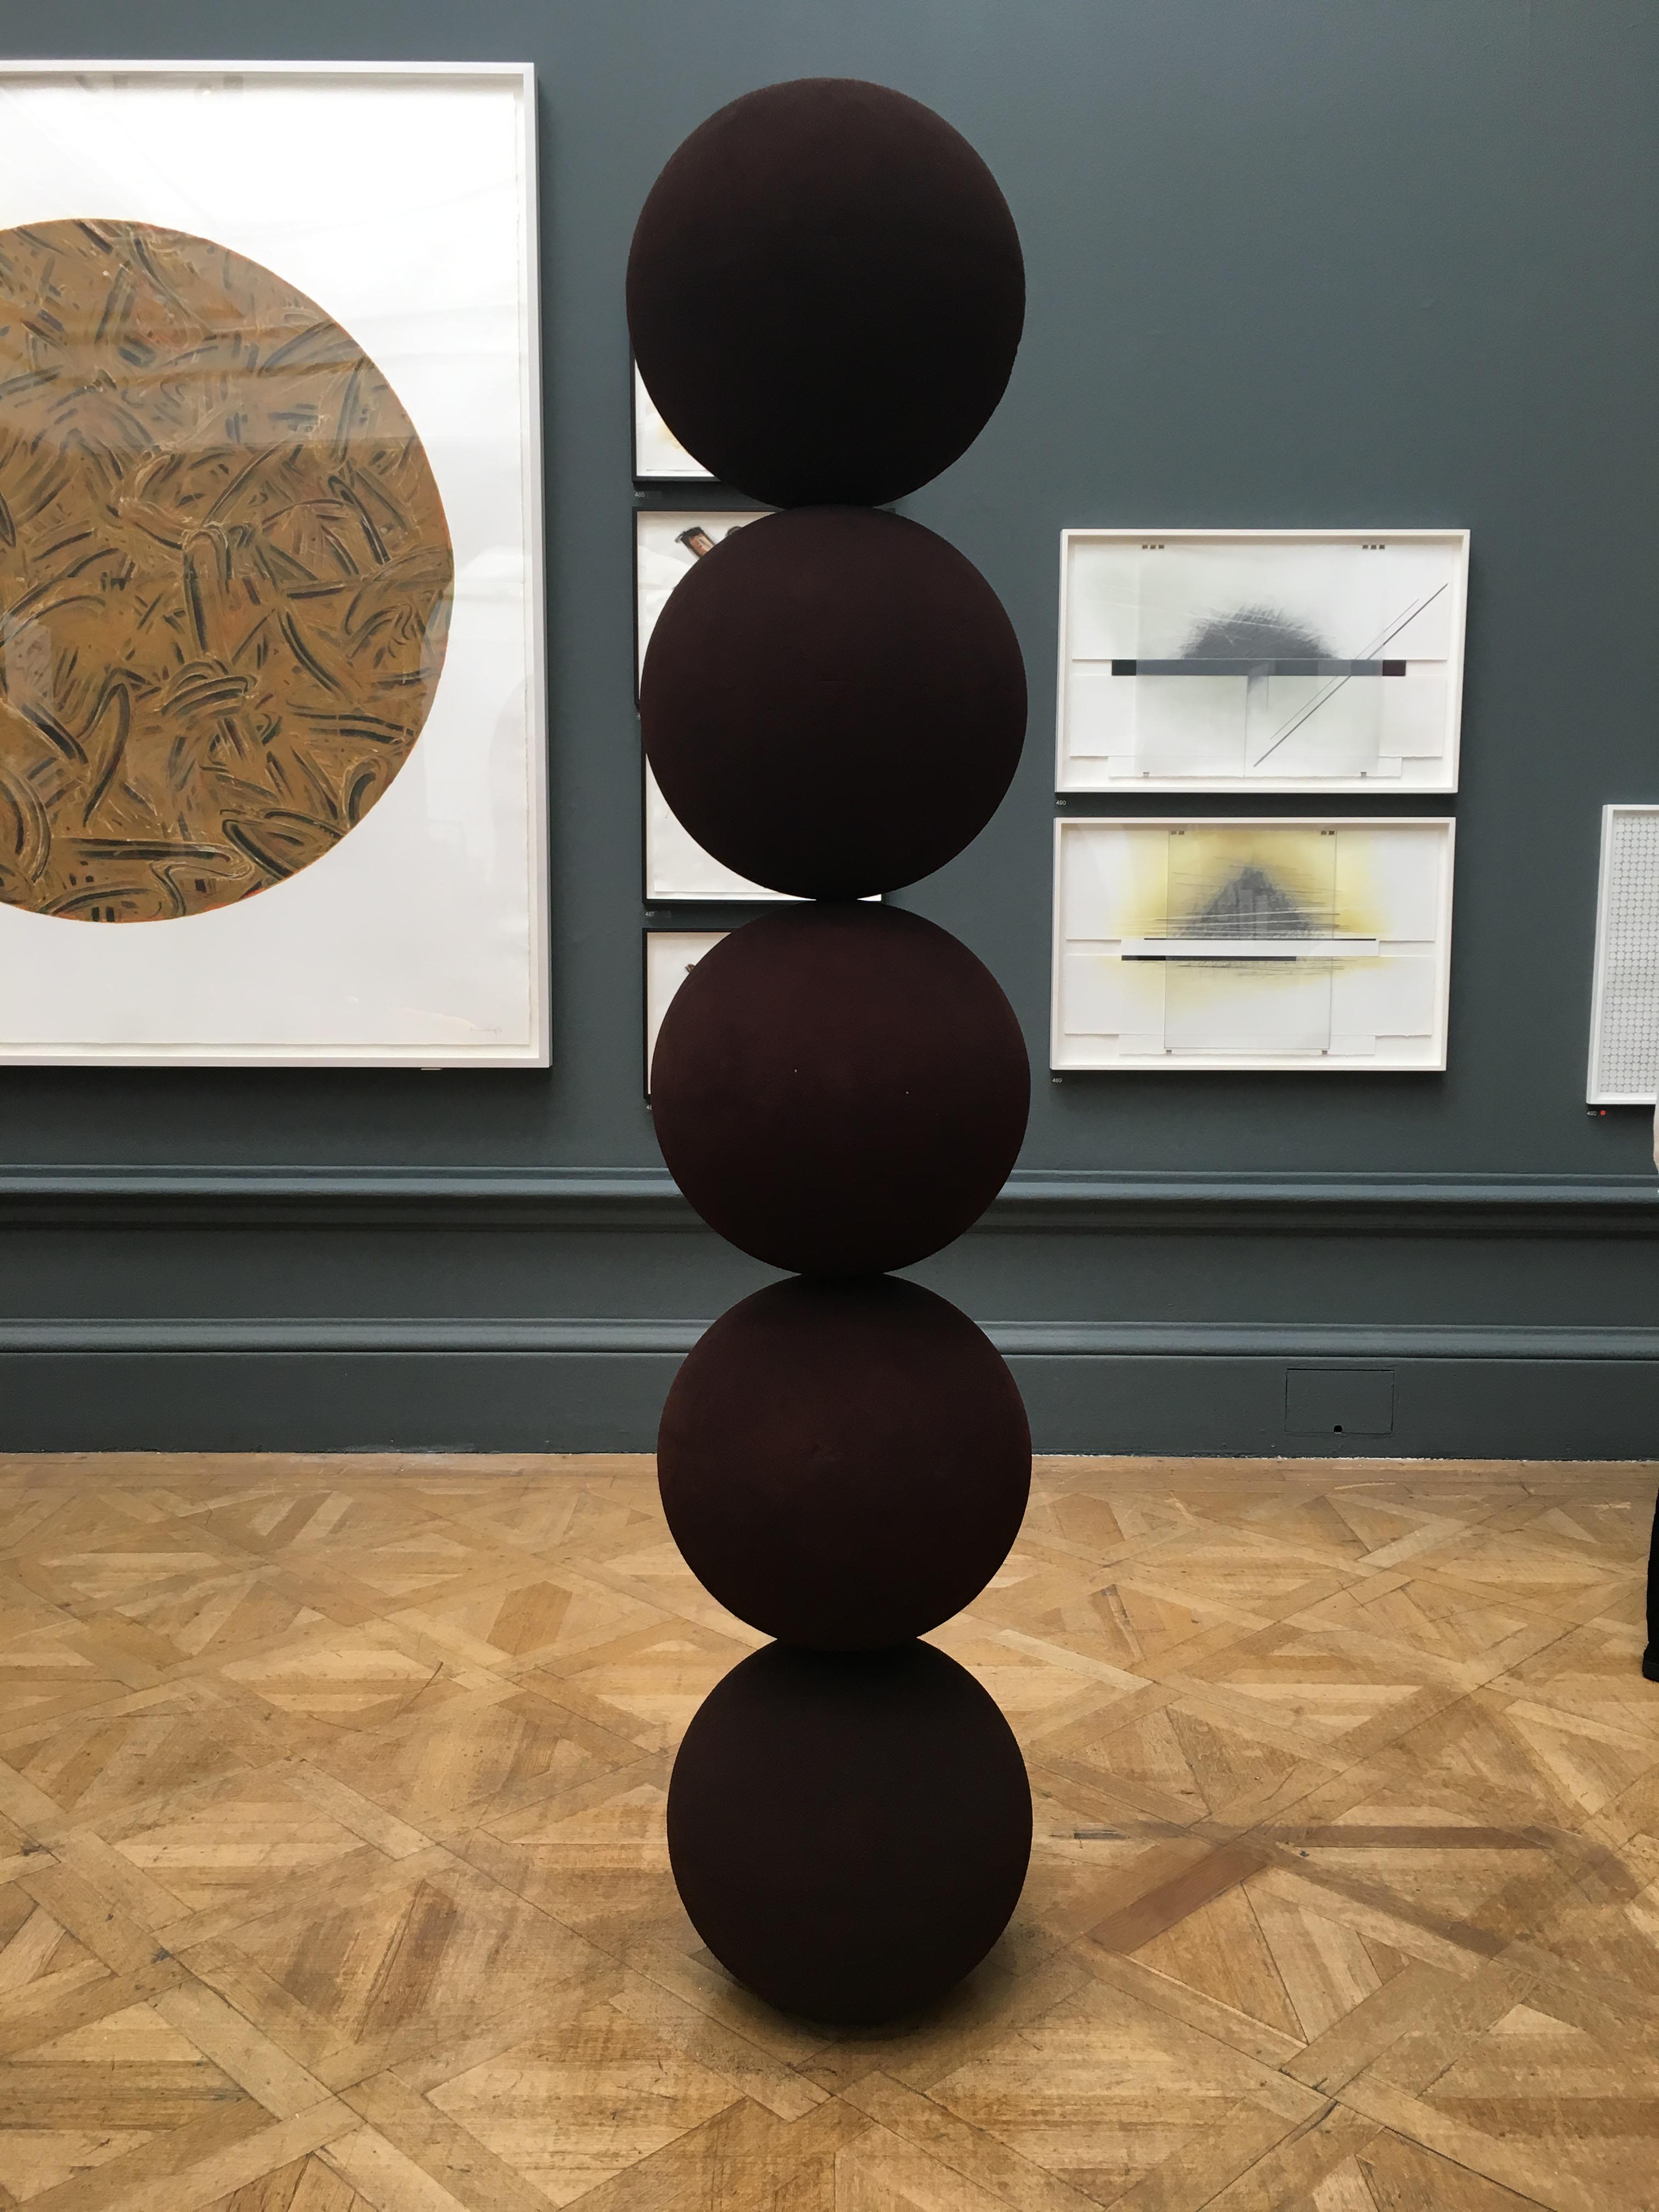 Stacked Balls Statue Royal Academy Summer Exhibition 2017